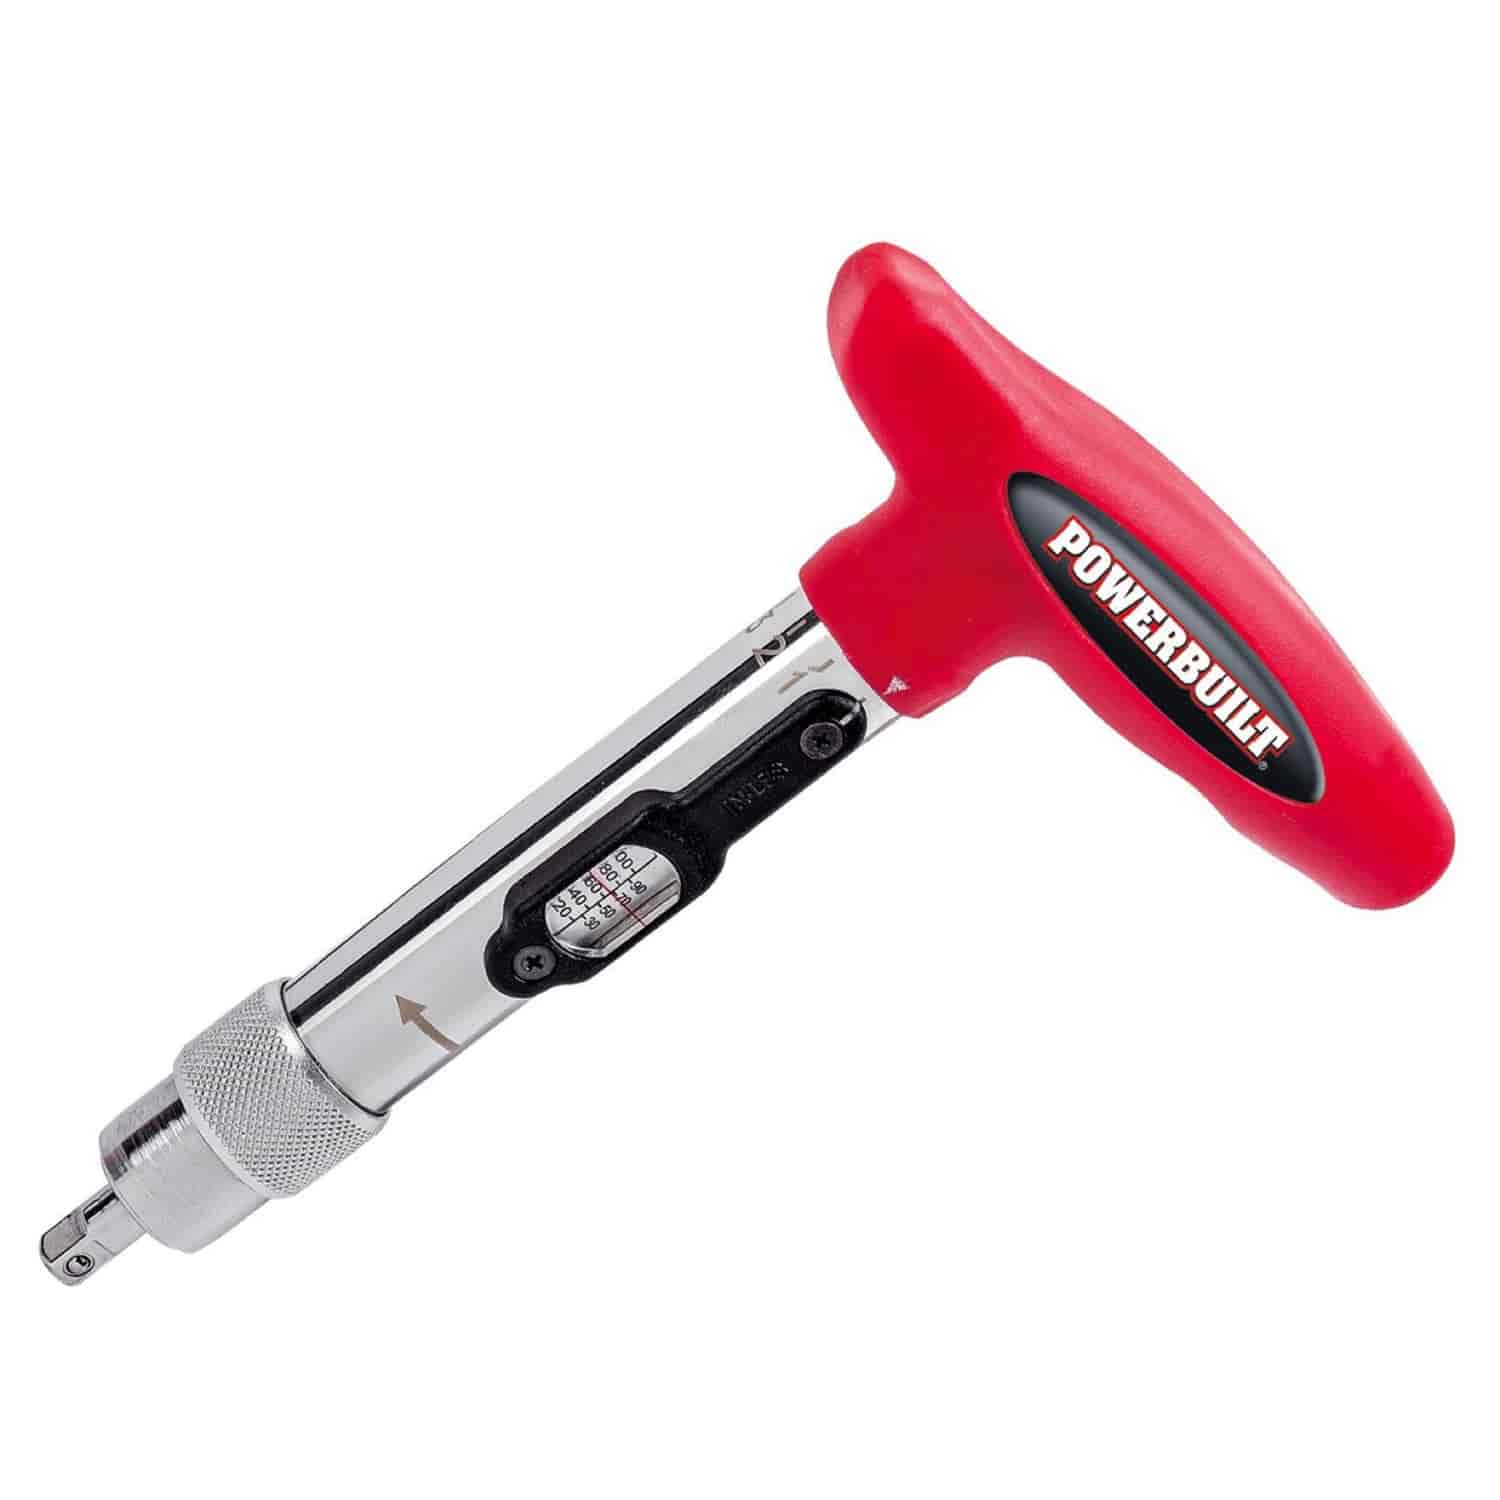 T-HNDLE TORQUE WRENCH